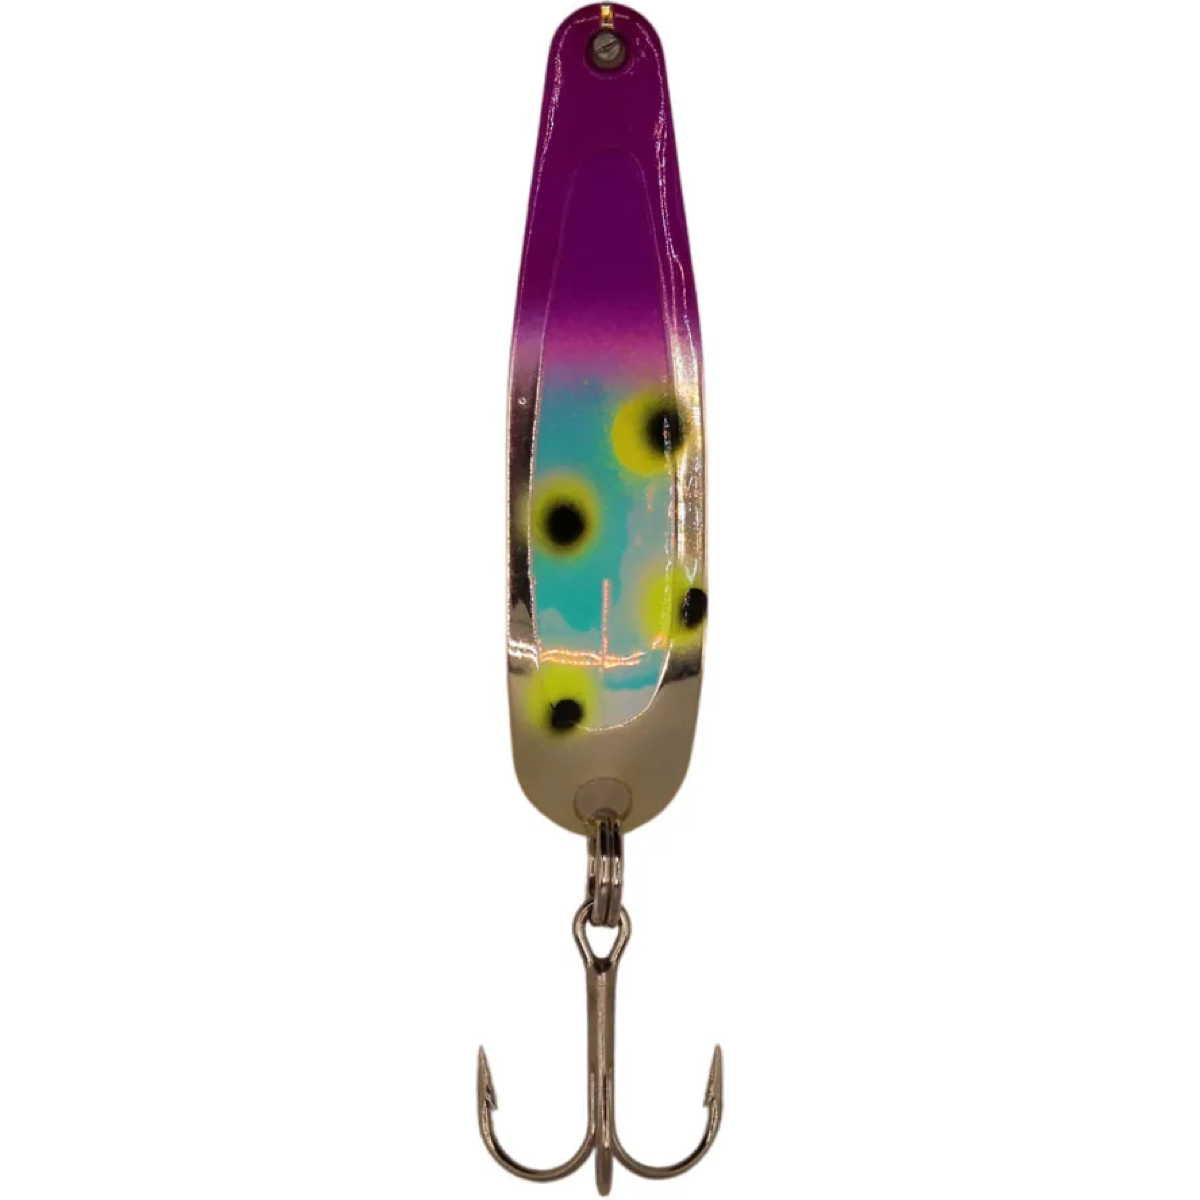 Photo of Advance Tackle Michigan Stinger Scorpion Spoon - Smooth Texture for sale at United Tackle Shops.